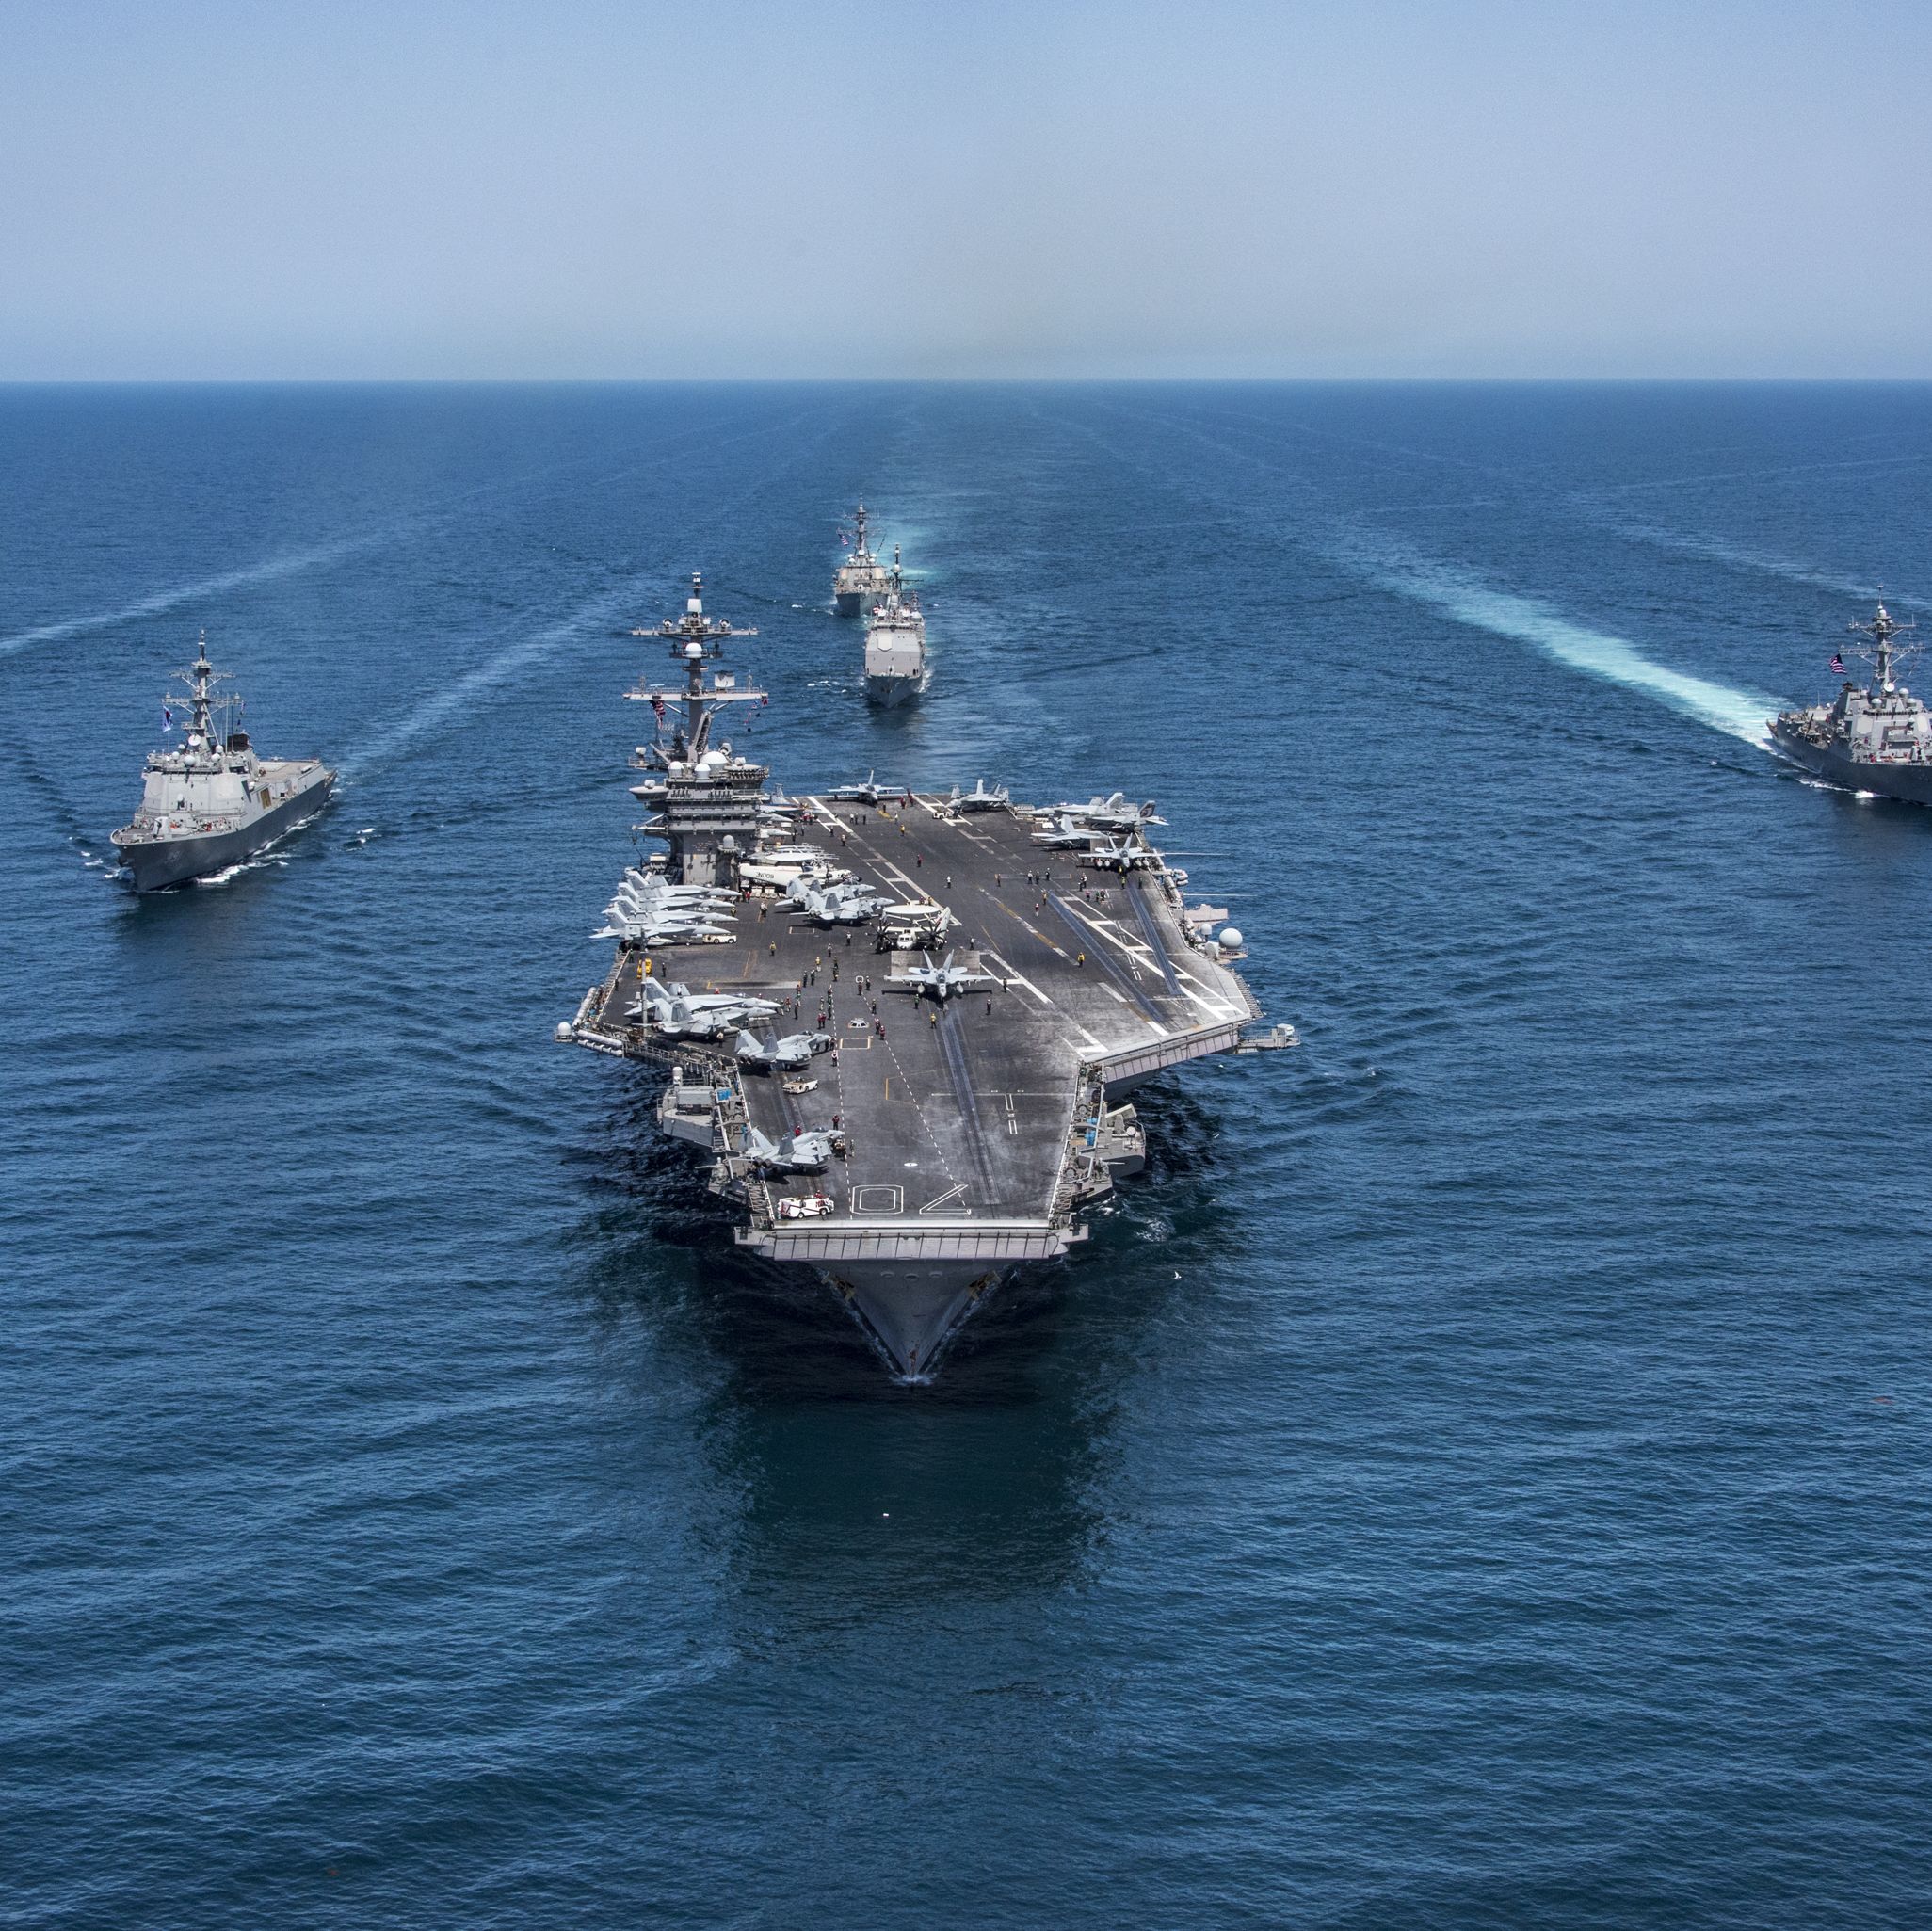 After Nearly 100 Years, Do the U.S. Navy's Aircraft Carriers Still Rule the Seas?